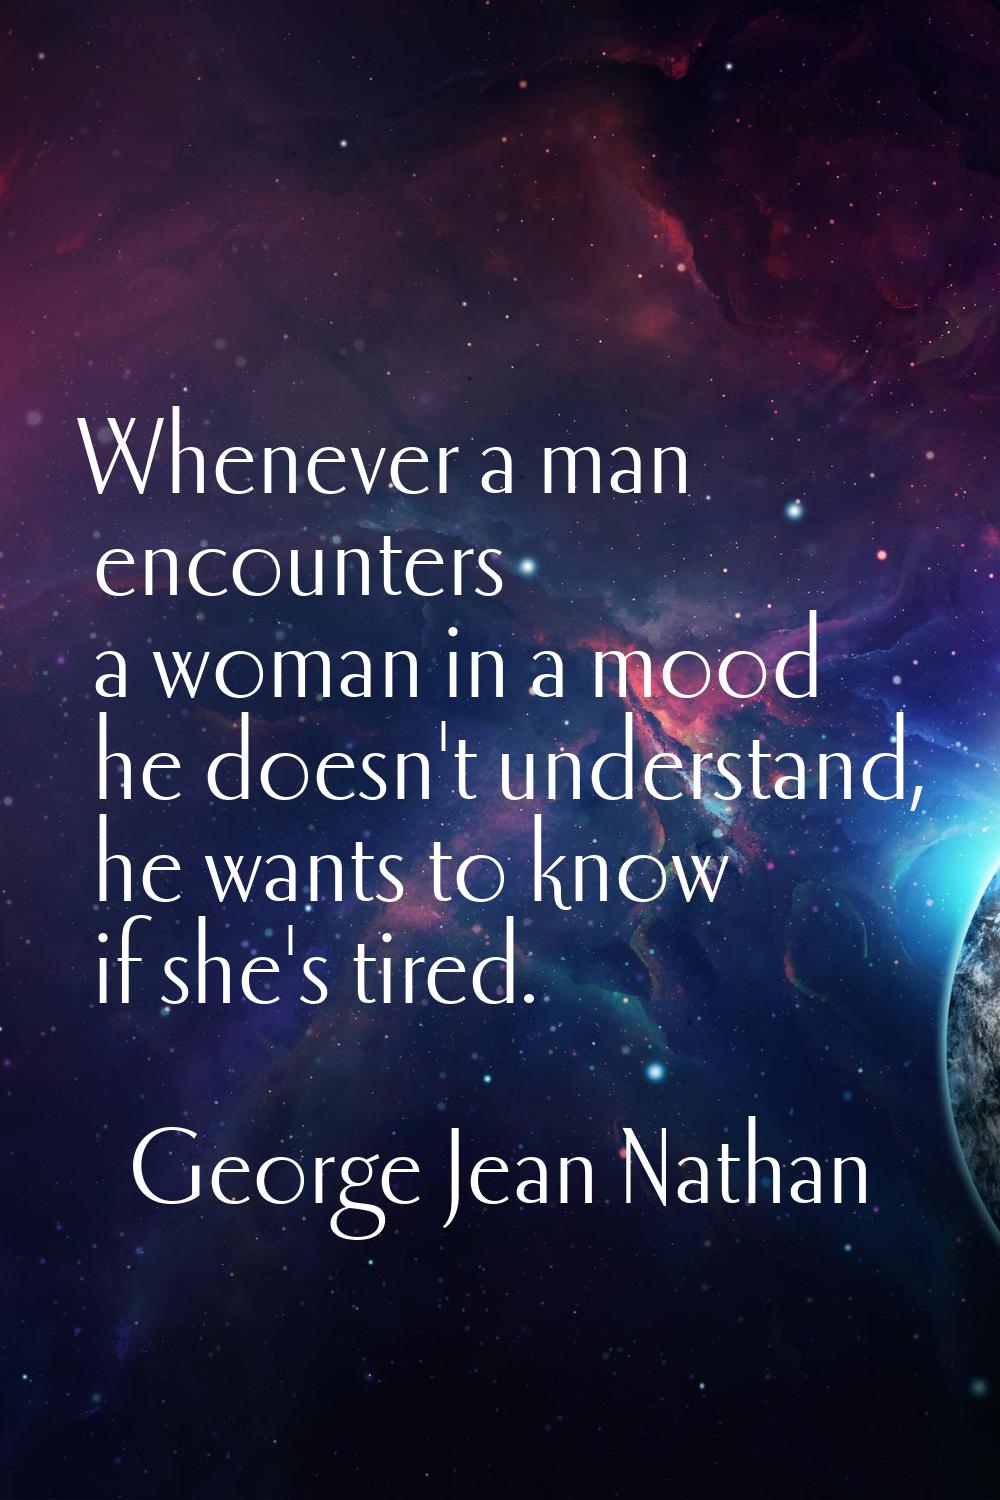 Whenever a man encounters a woman in a mood he doesn't understand, he wants to know if she's tired.